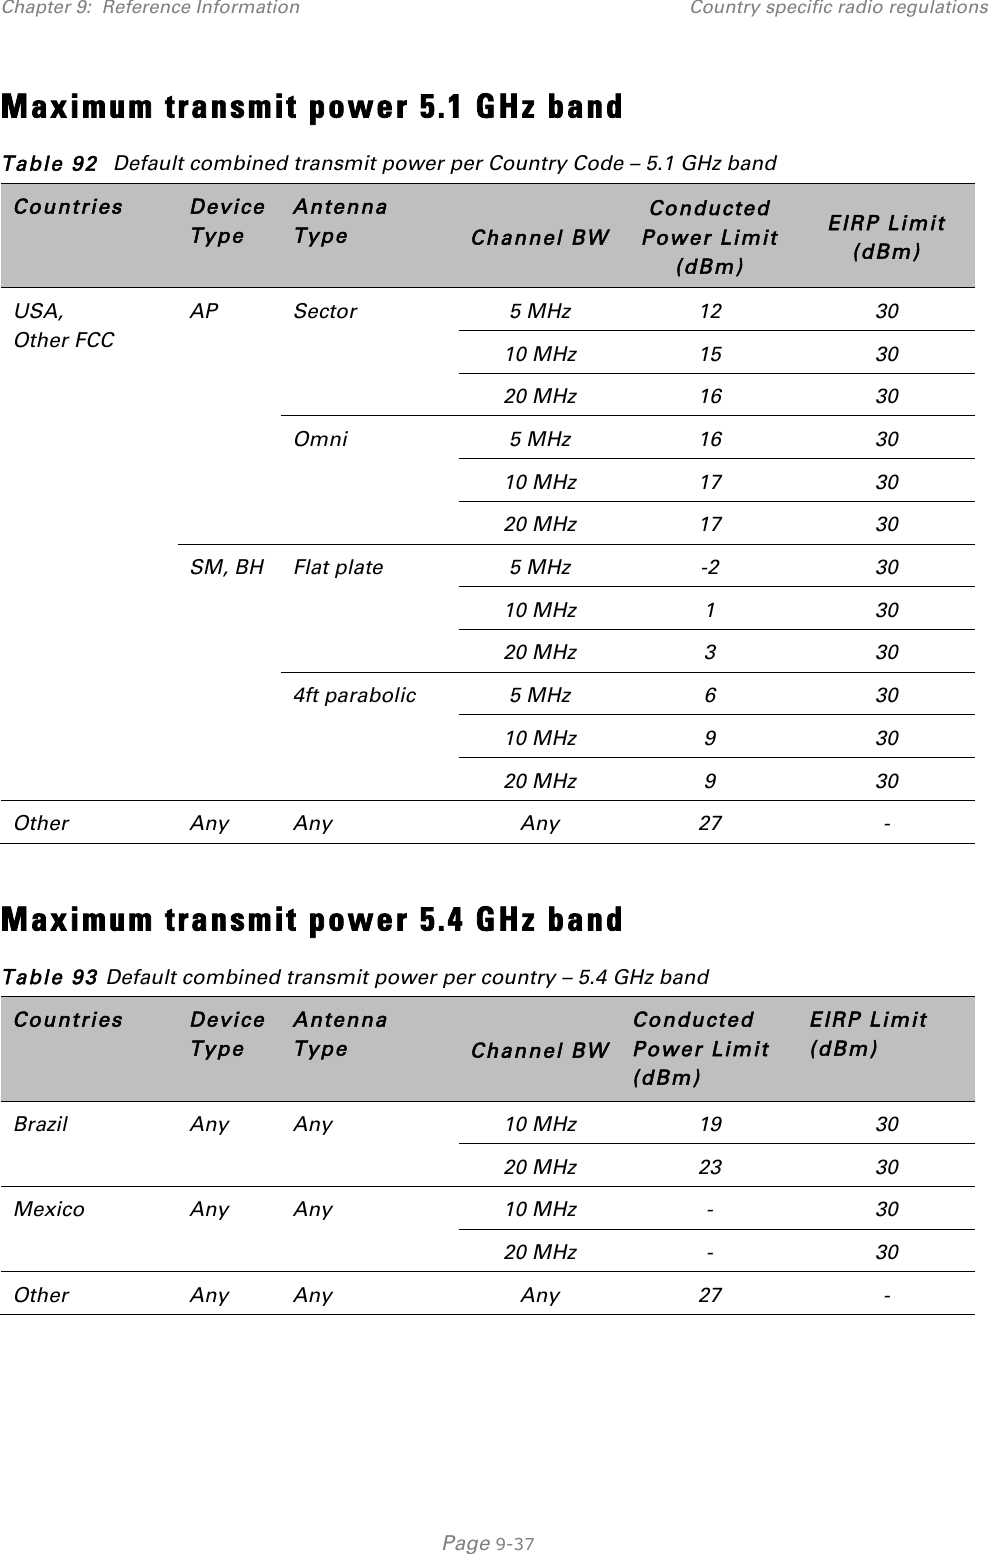 Chapter 9:  Reference Information Country specific radio regulations   Page 9-37 Maximum transmit power 5.1 GHz band Table 92  Default combined transmit power per Country Code – 5.1 GHz band Countries Device Type Antenna Type Channel BW Conducted Power Limit (dBm) EIRP Limit (dBm) USA,  Other FCC AP Sector 5 MHz 12 30 10 MHz 15 30 20 MHz 16 30 Omni 5 MHz 16 30 10 MHz 17 30 20 MHz 17 30 SM, BH Flat plate 5 MHz -2 30 10 MHz 1 30 20 MHz 3 30 4ft parabolic 5 MHz 6 30 10 MHz 9 30 20 MHz 9 30 Other Any Any Any 27 -  Maximum transmit power 5.4 GHz band Table 93 Default combined transmit power per country – 5.4 GHz band Countries Device Type Antenna Type Channel BW Conducted Power Limit (dBm) EIRP Limit (dBm) Brazil Any Any 10 MHz 19 30 20 MHz 23 30 Mexico Any Any 10 MHz - 30 20 MHz - 30 Other Any Any Any 27 -  